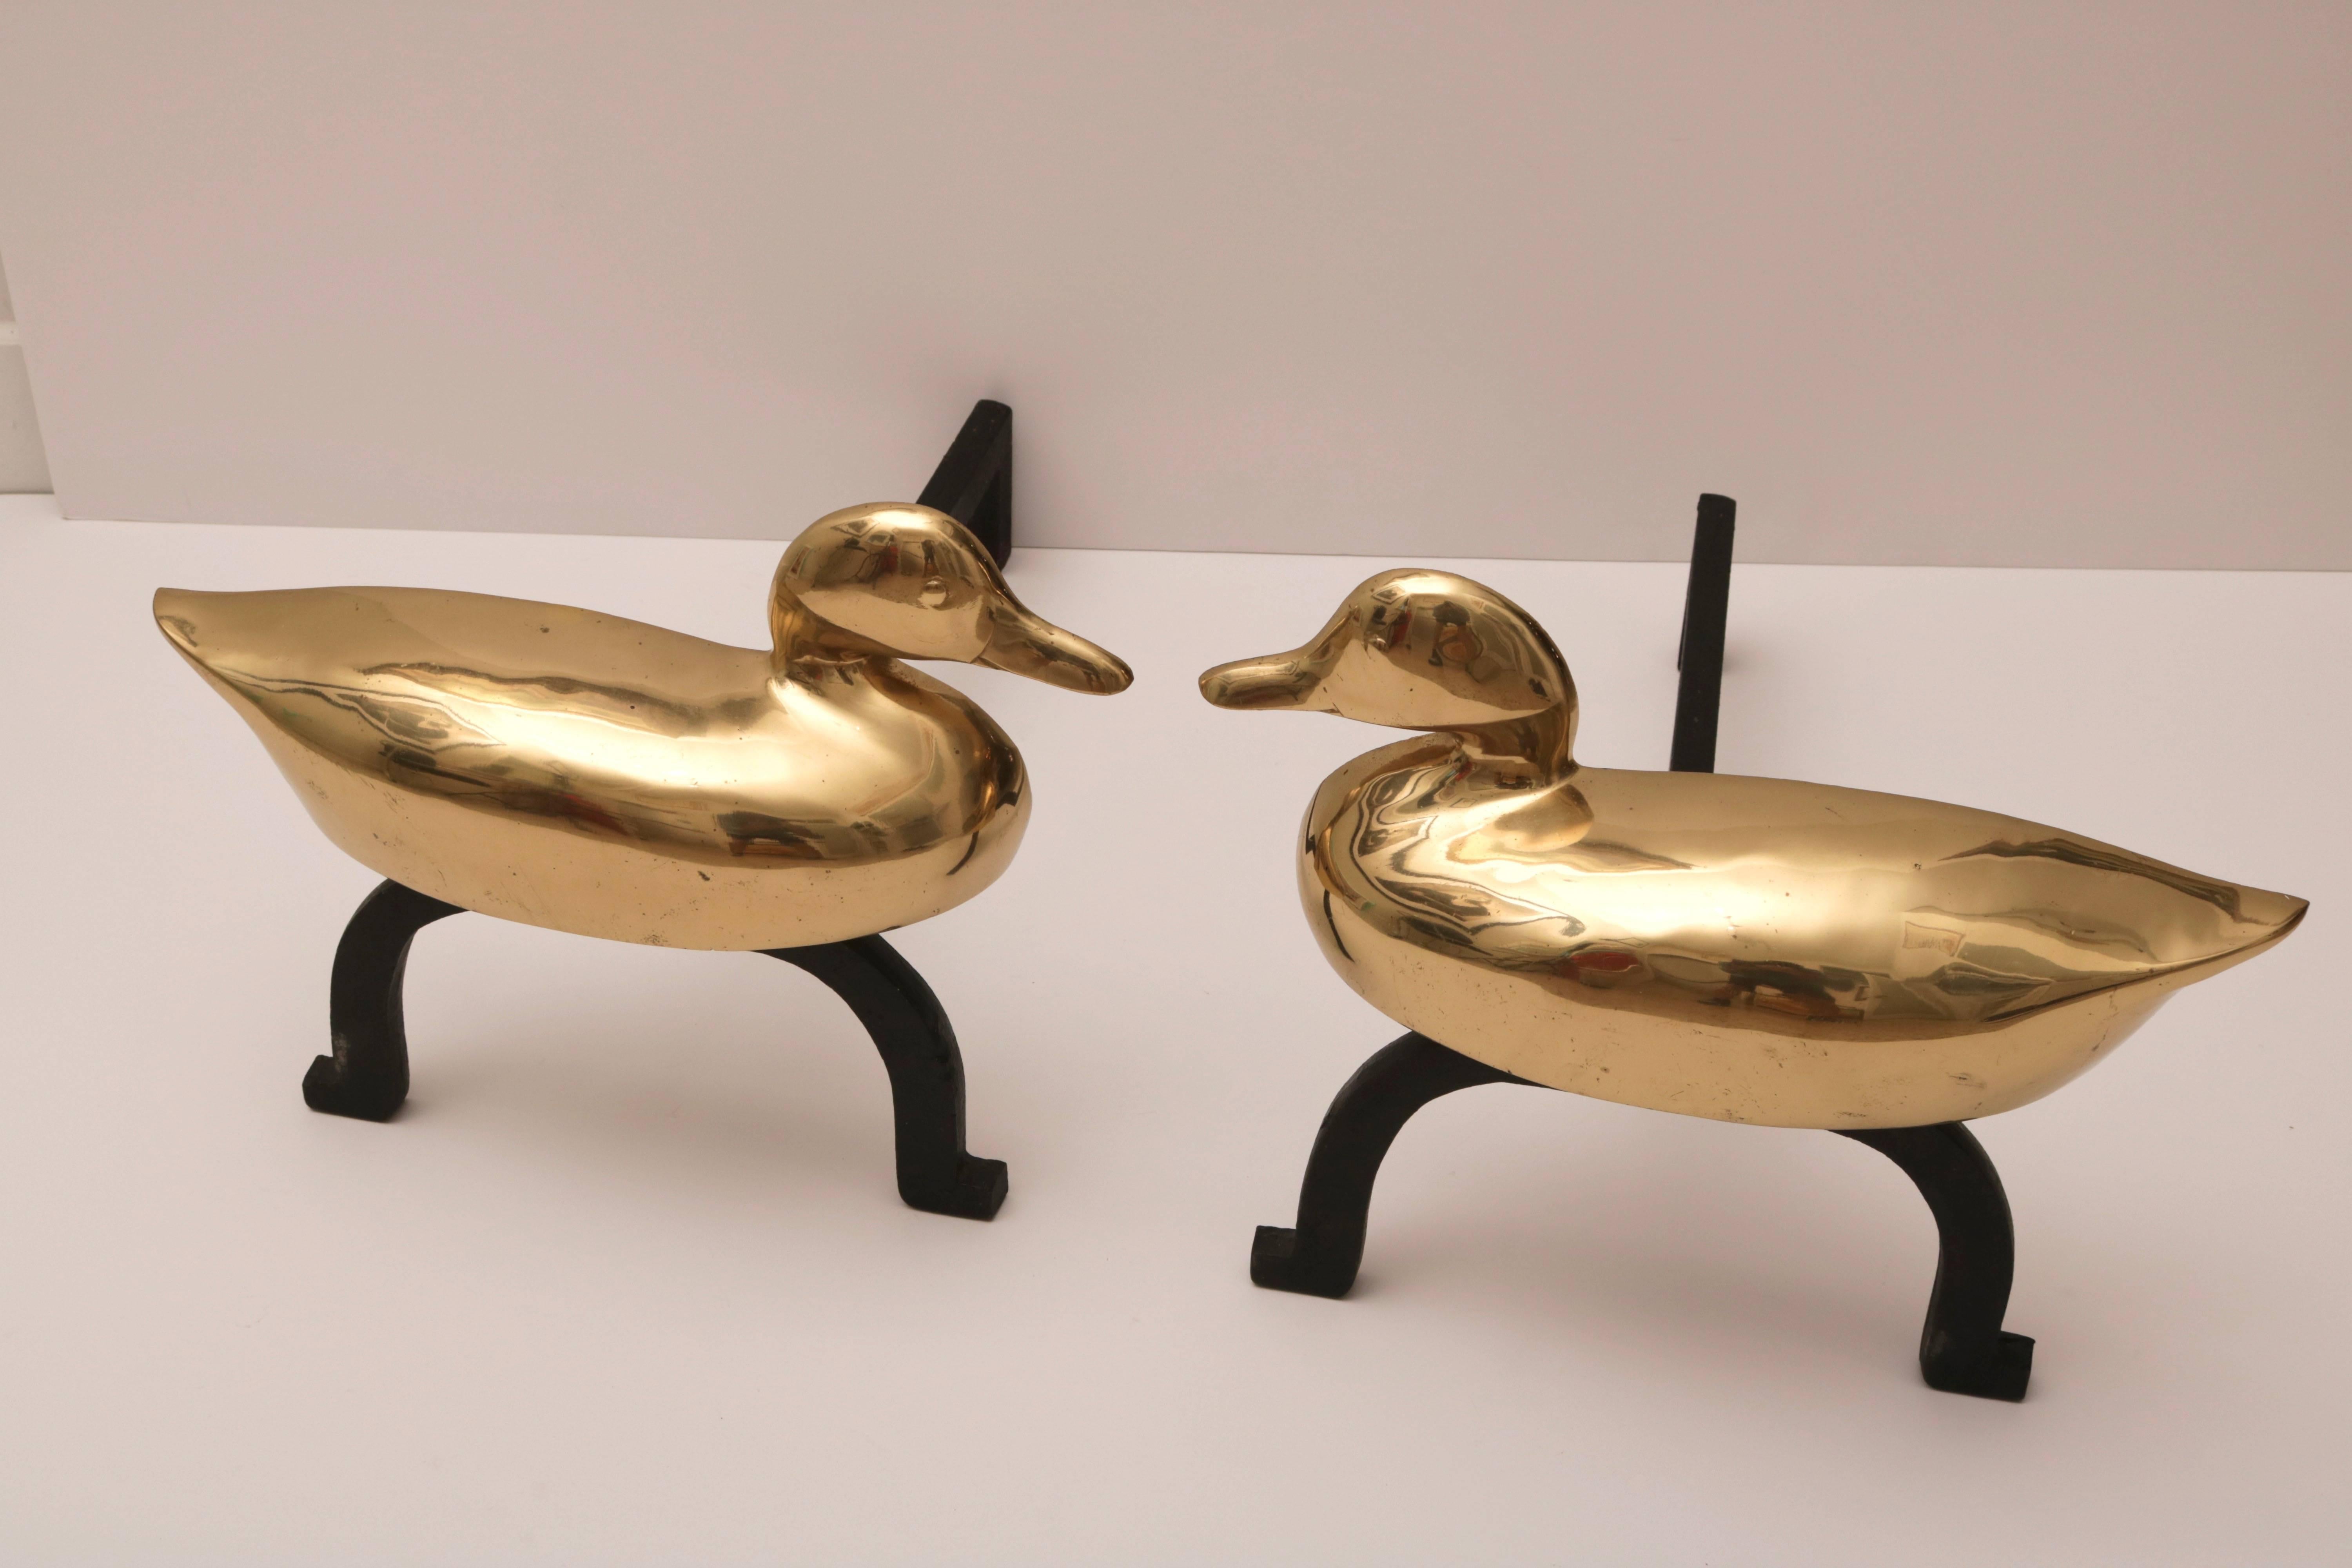 This set of Mallard form andirons date from the mid to late 20th century and will make the perfect addition to your fireplace and hearth. 

Note: They have been professionally polished.

Please feel free to contact us directly for a shipping